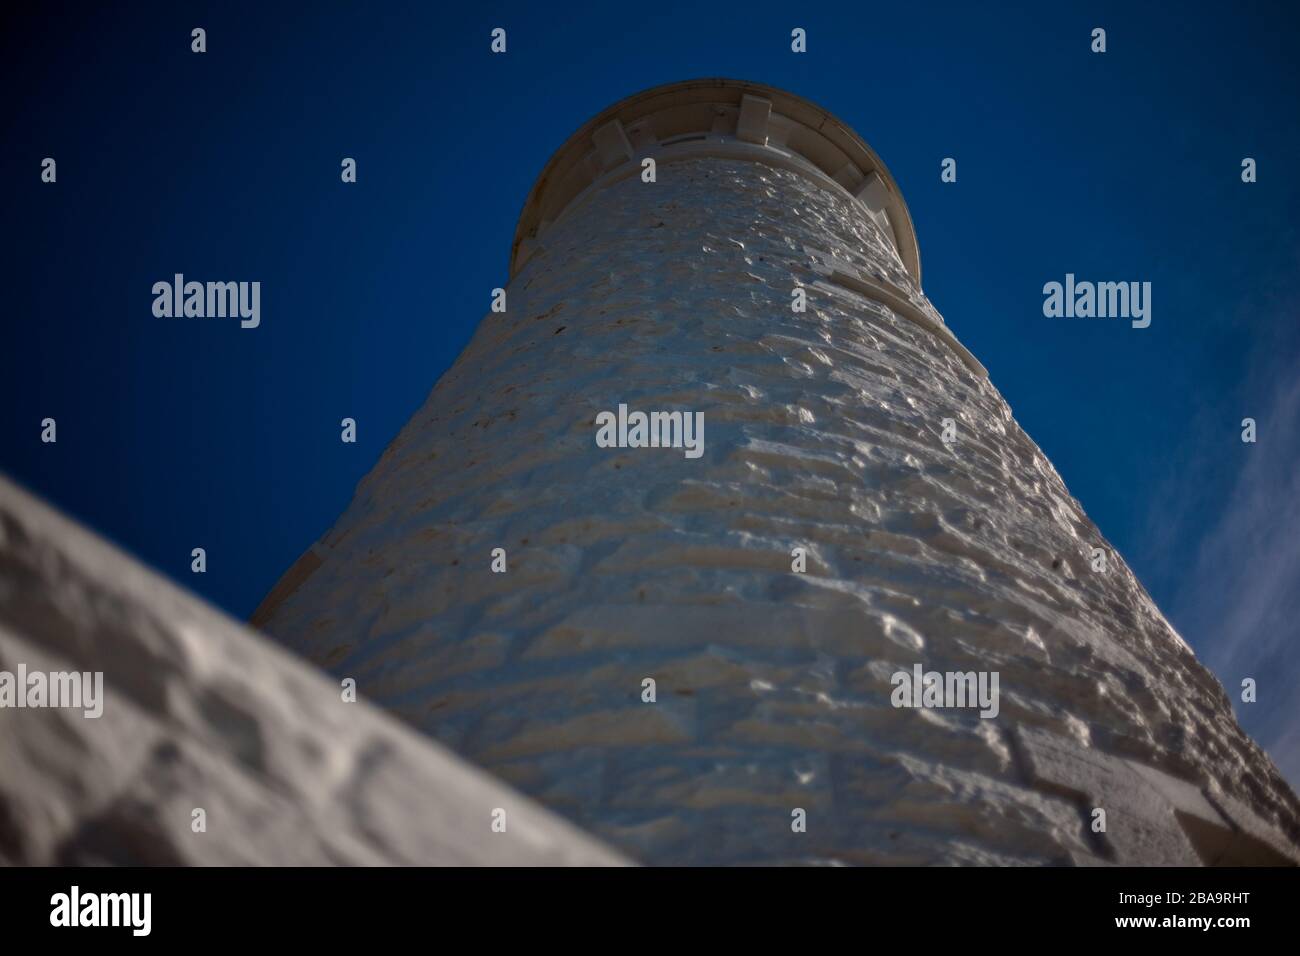 A look up at the tower of the Cape Leeuwin lighthouse, Western Australia. Stock Photo